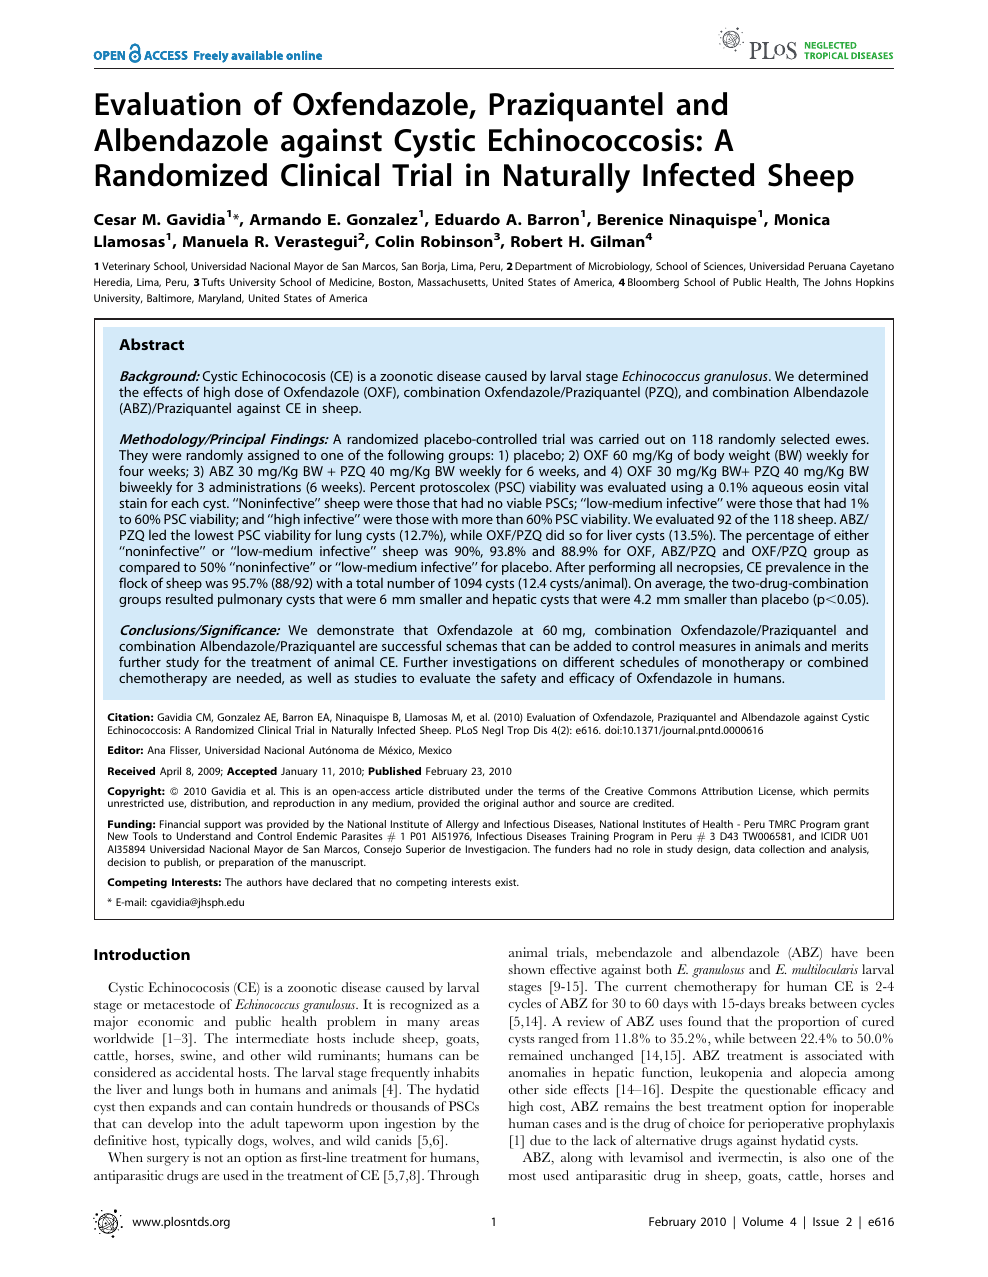 Evaluation Of Oxfendazole Praziquantel And Albendazole Against Cystic Echinococcosis A Randomized Clinical Trial In Naturally Infected Sheep Topic Of Research Paper In Veterinary Science Download Scholarly Article Pdf And Read For